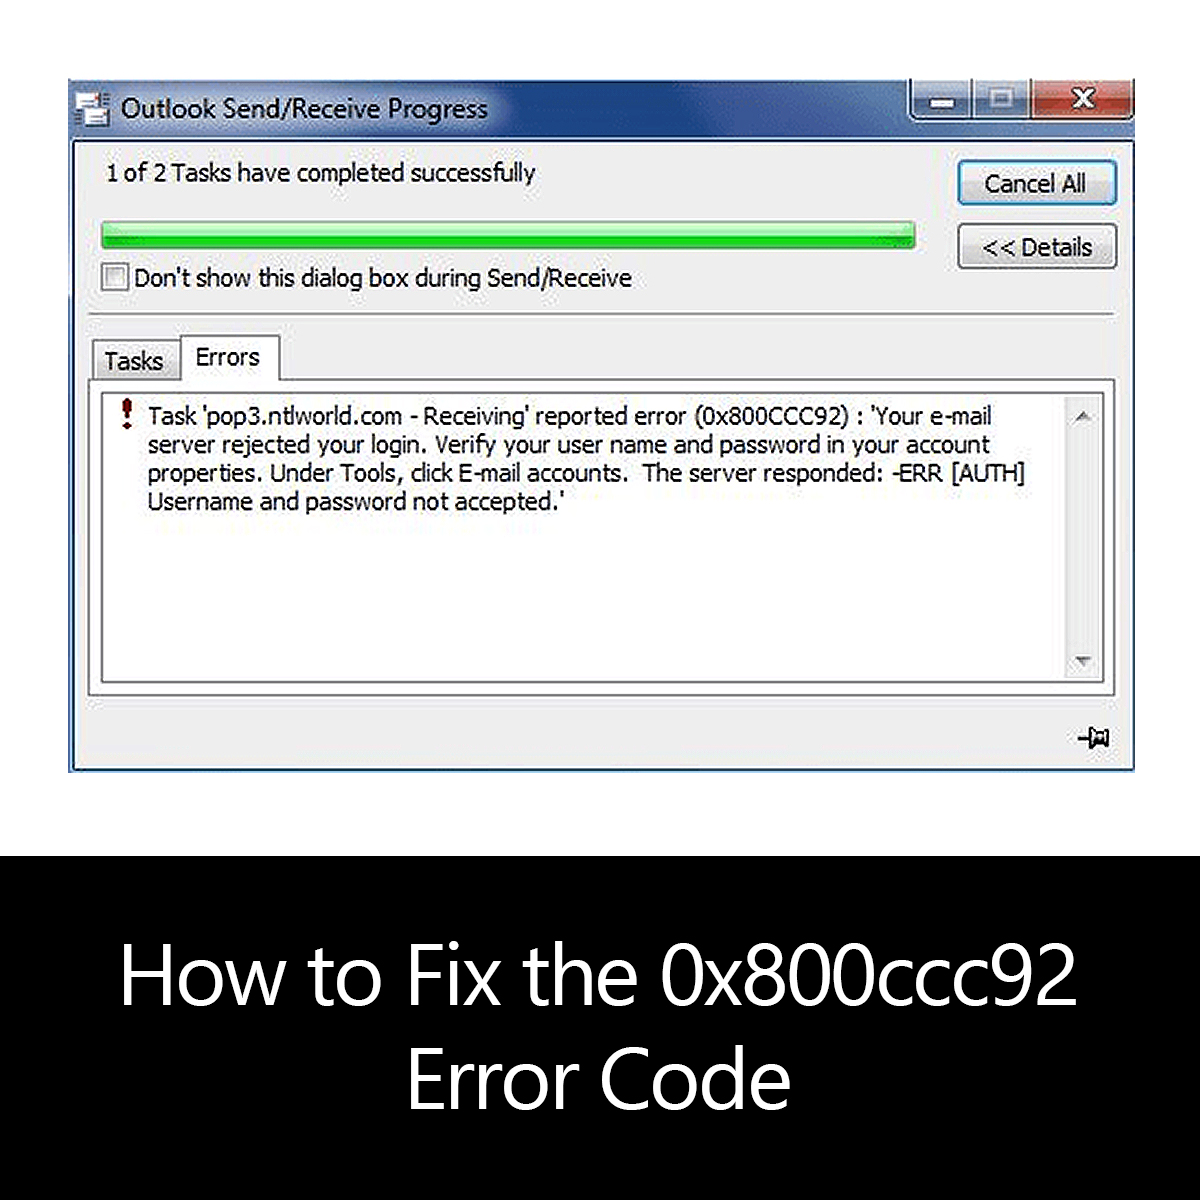 outlook state error #01x800cccx92